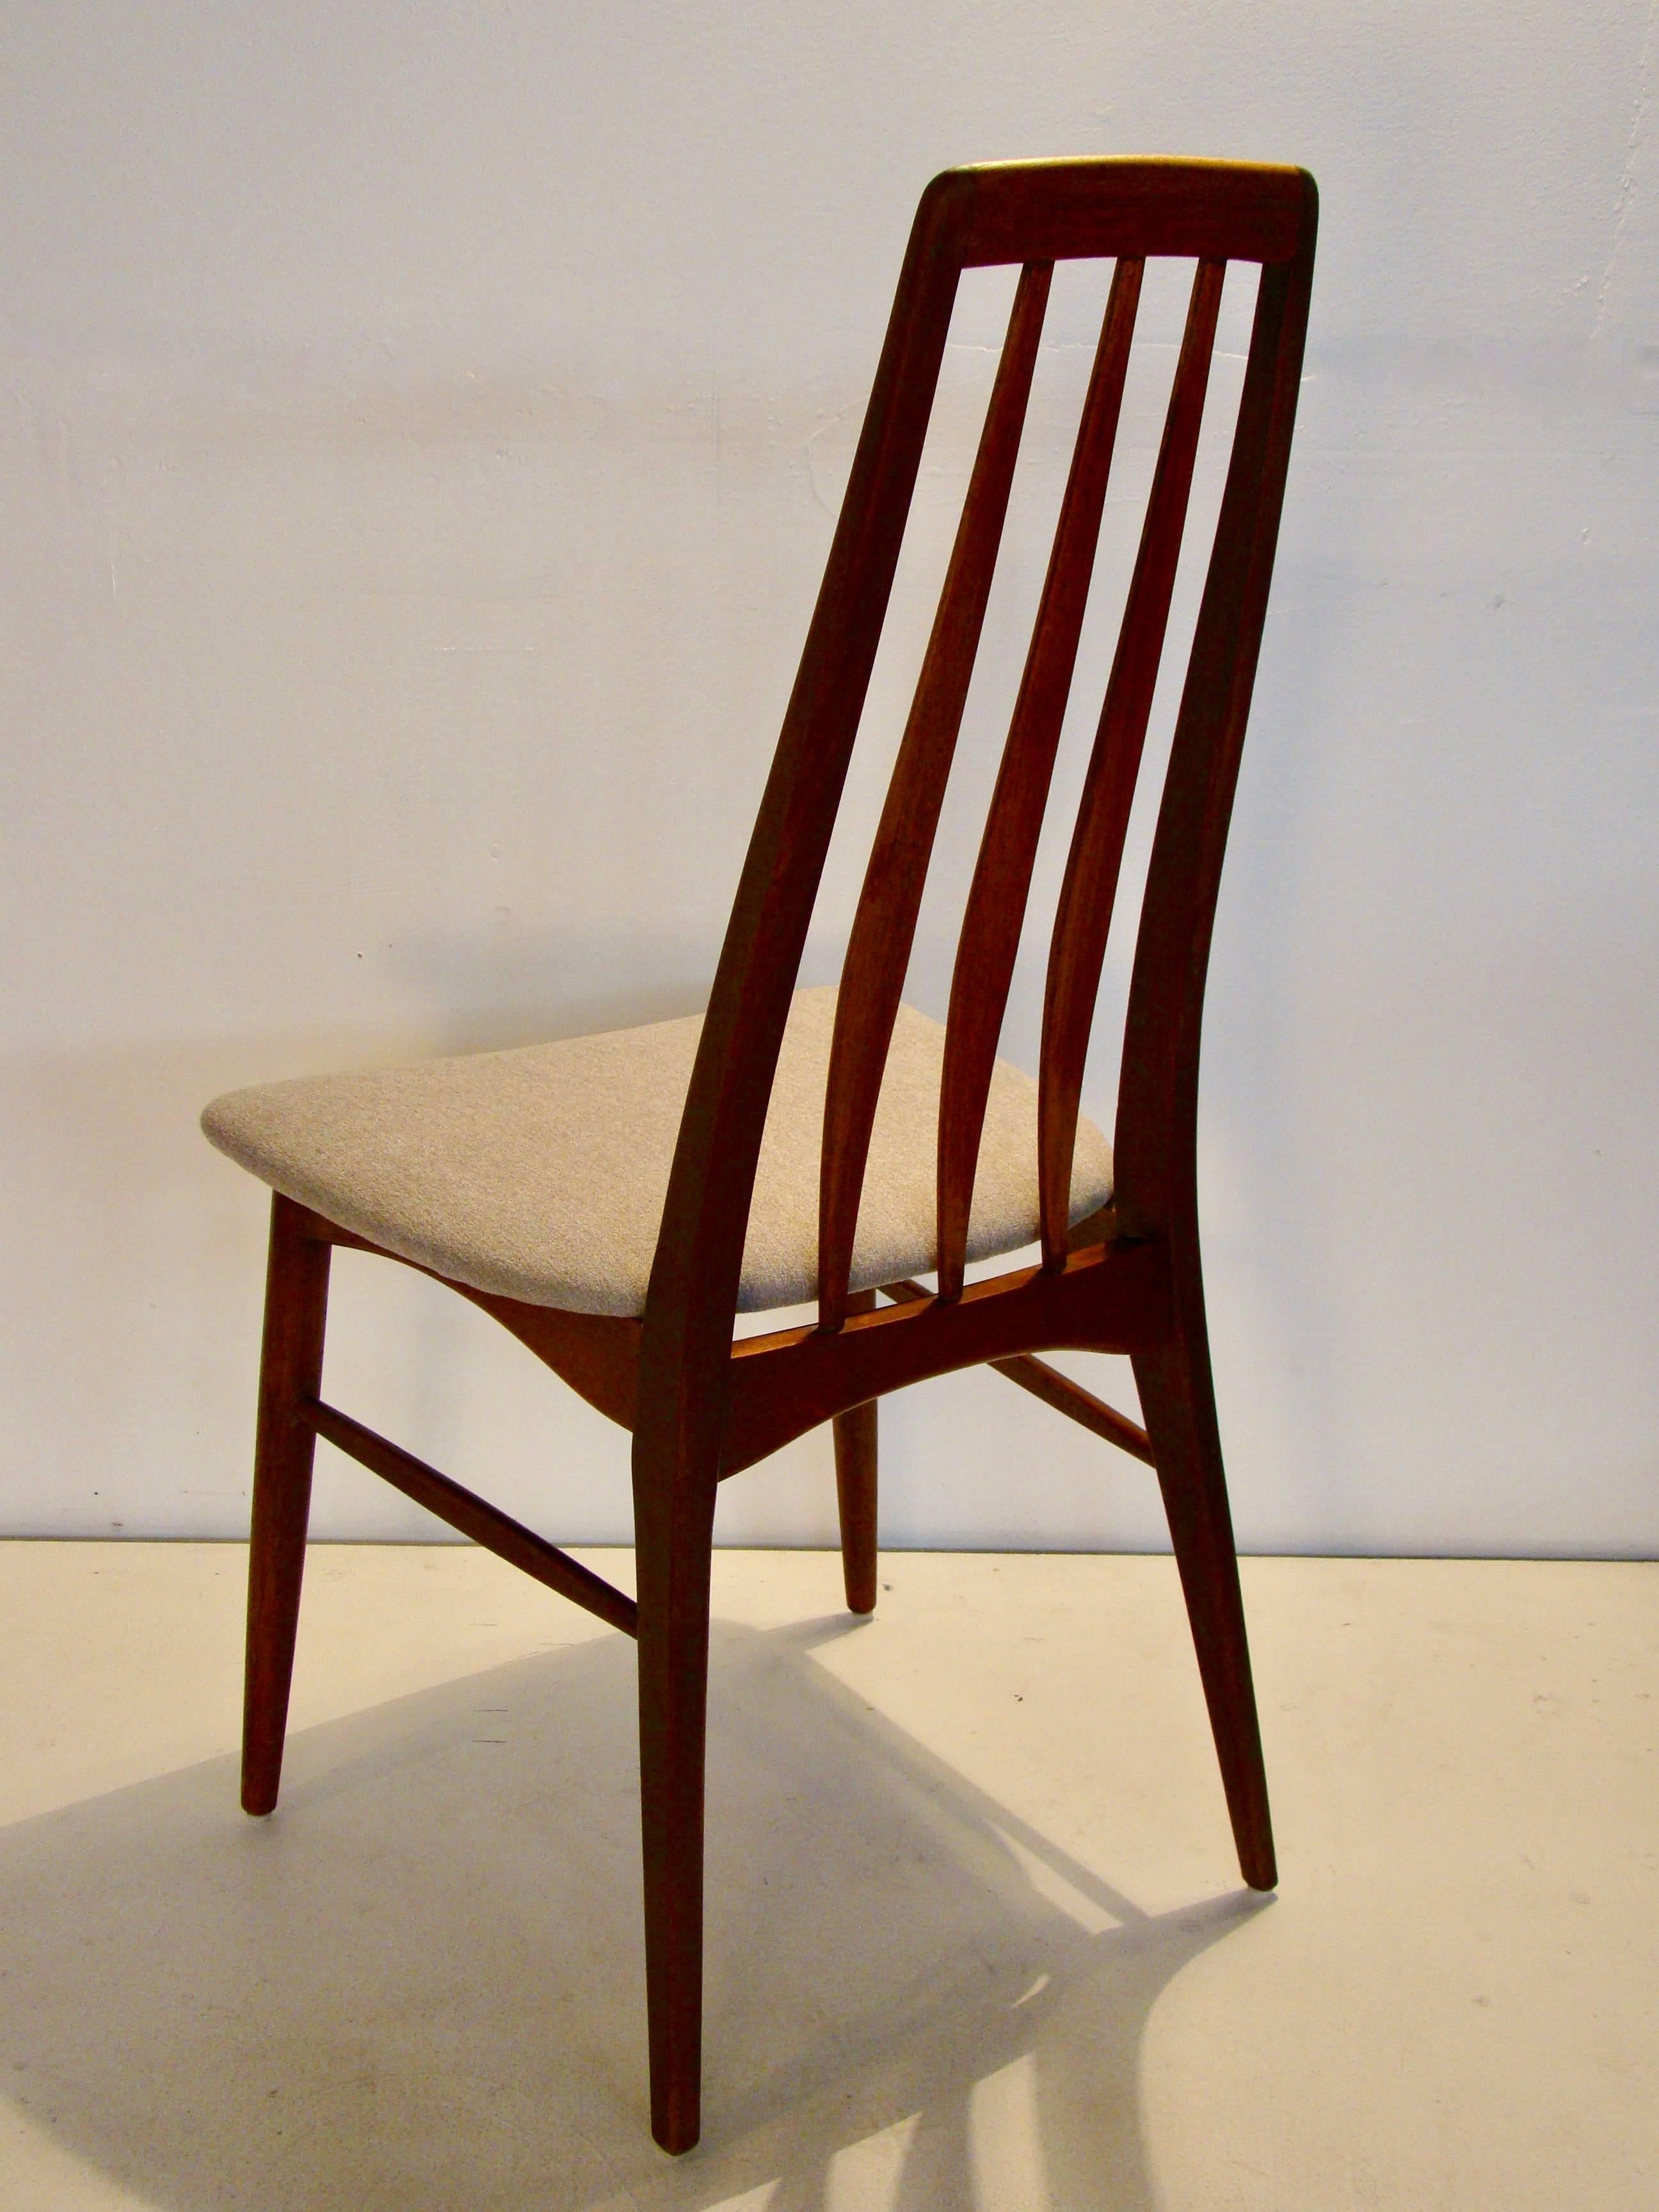 Mid-20th Century Danish Modern Teak High Back Set of Six Dining Chairs by Koefoeds Hornslet